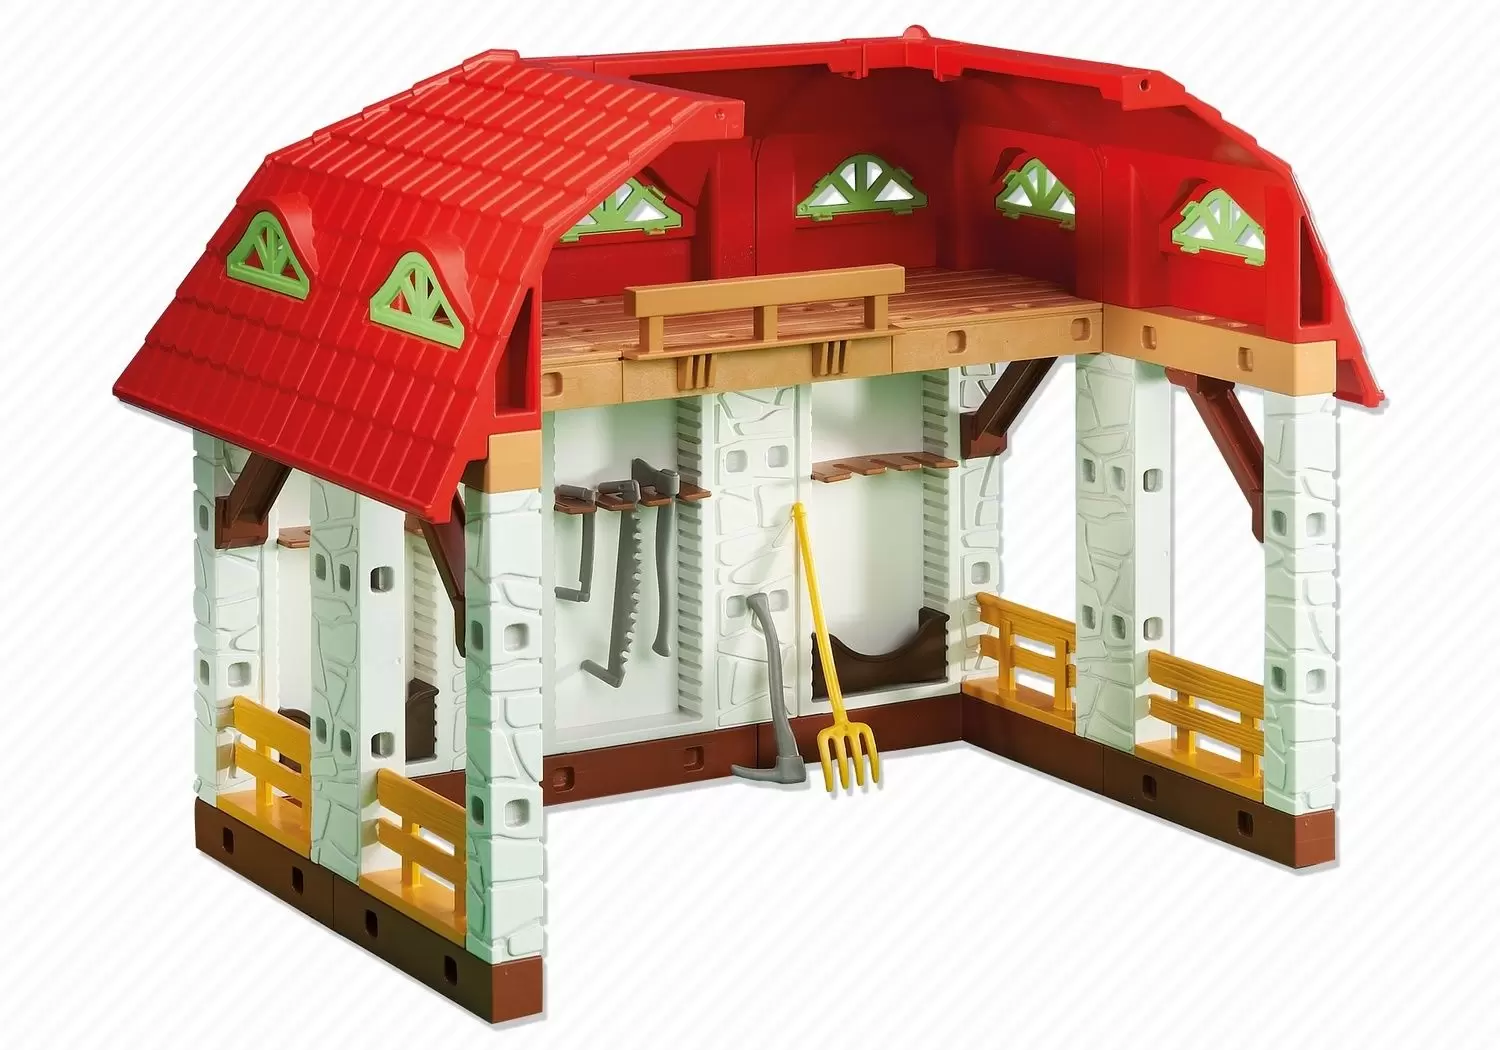 Playmobil Accessories & decorations - Farm Equipment Shed